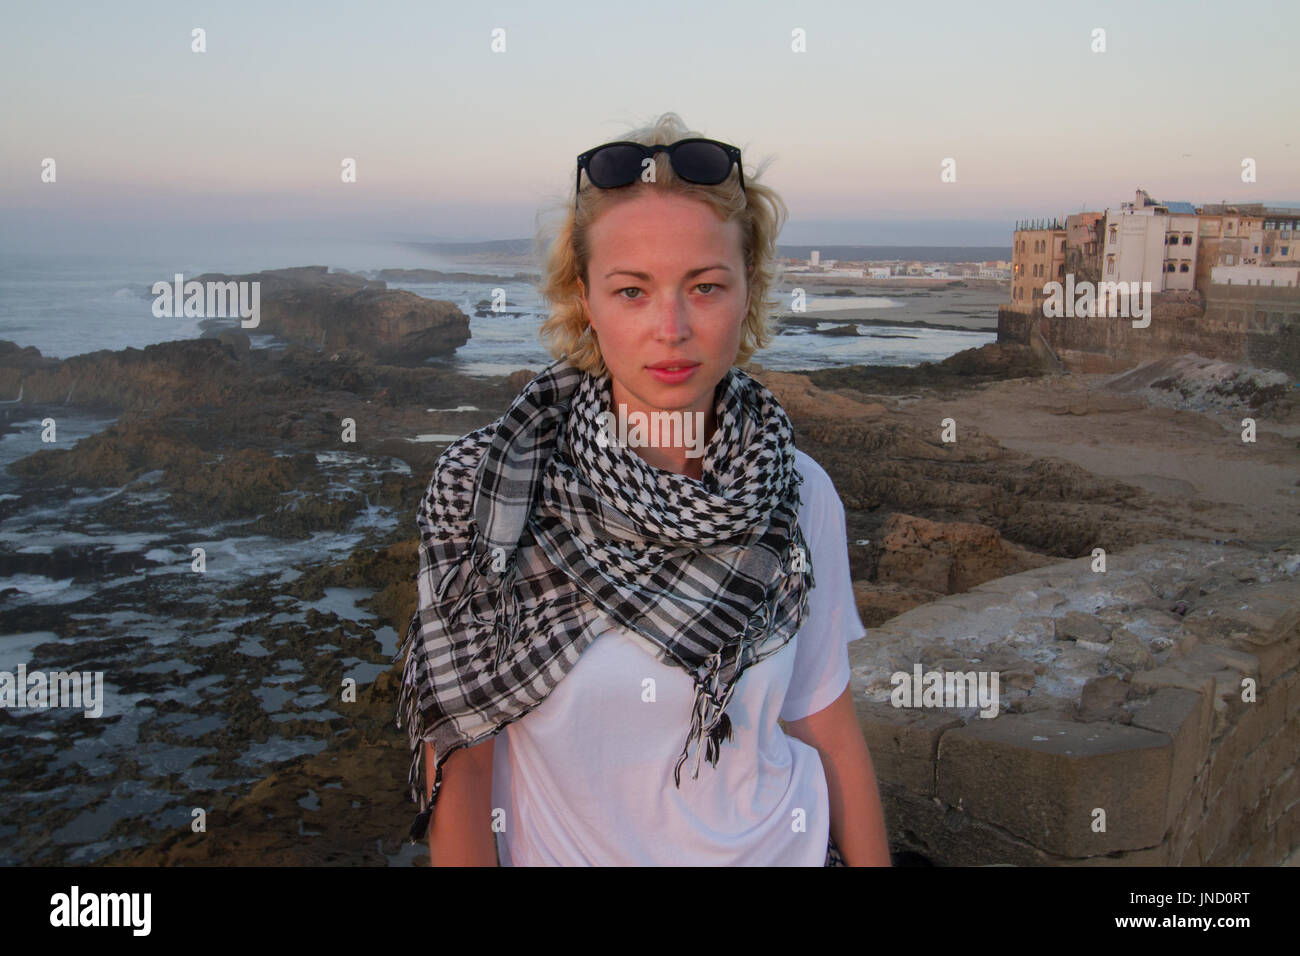 Female traveler standing on city fortress wall of Essaouira, Morocco in sunset. Stock Photo